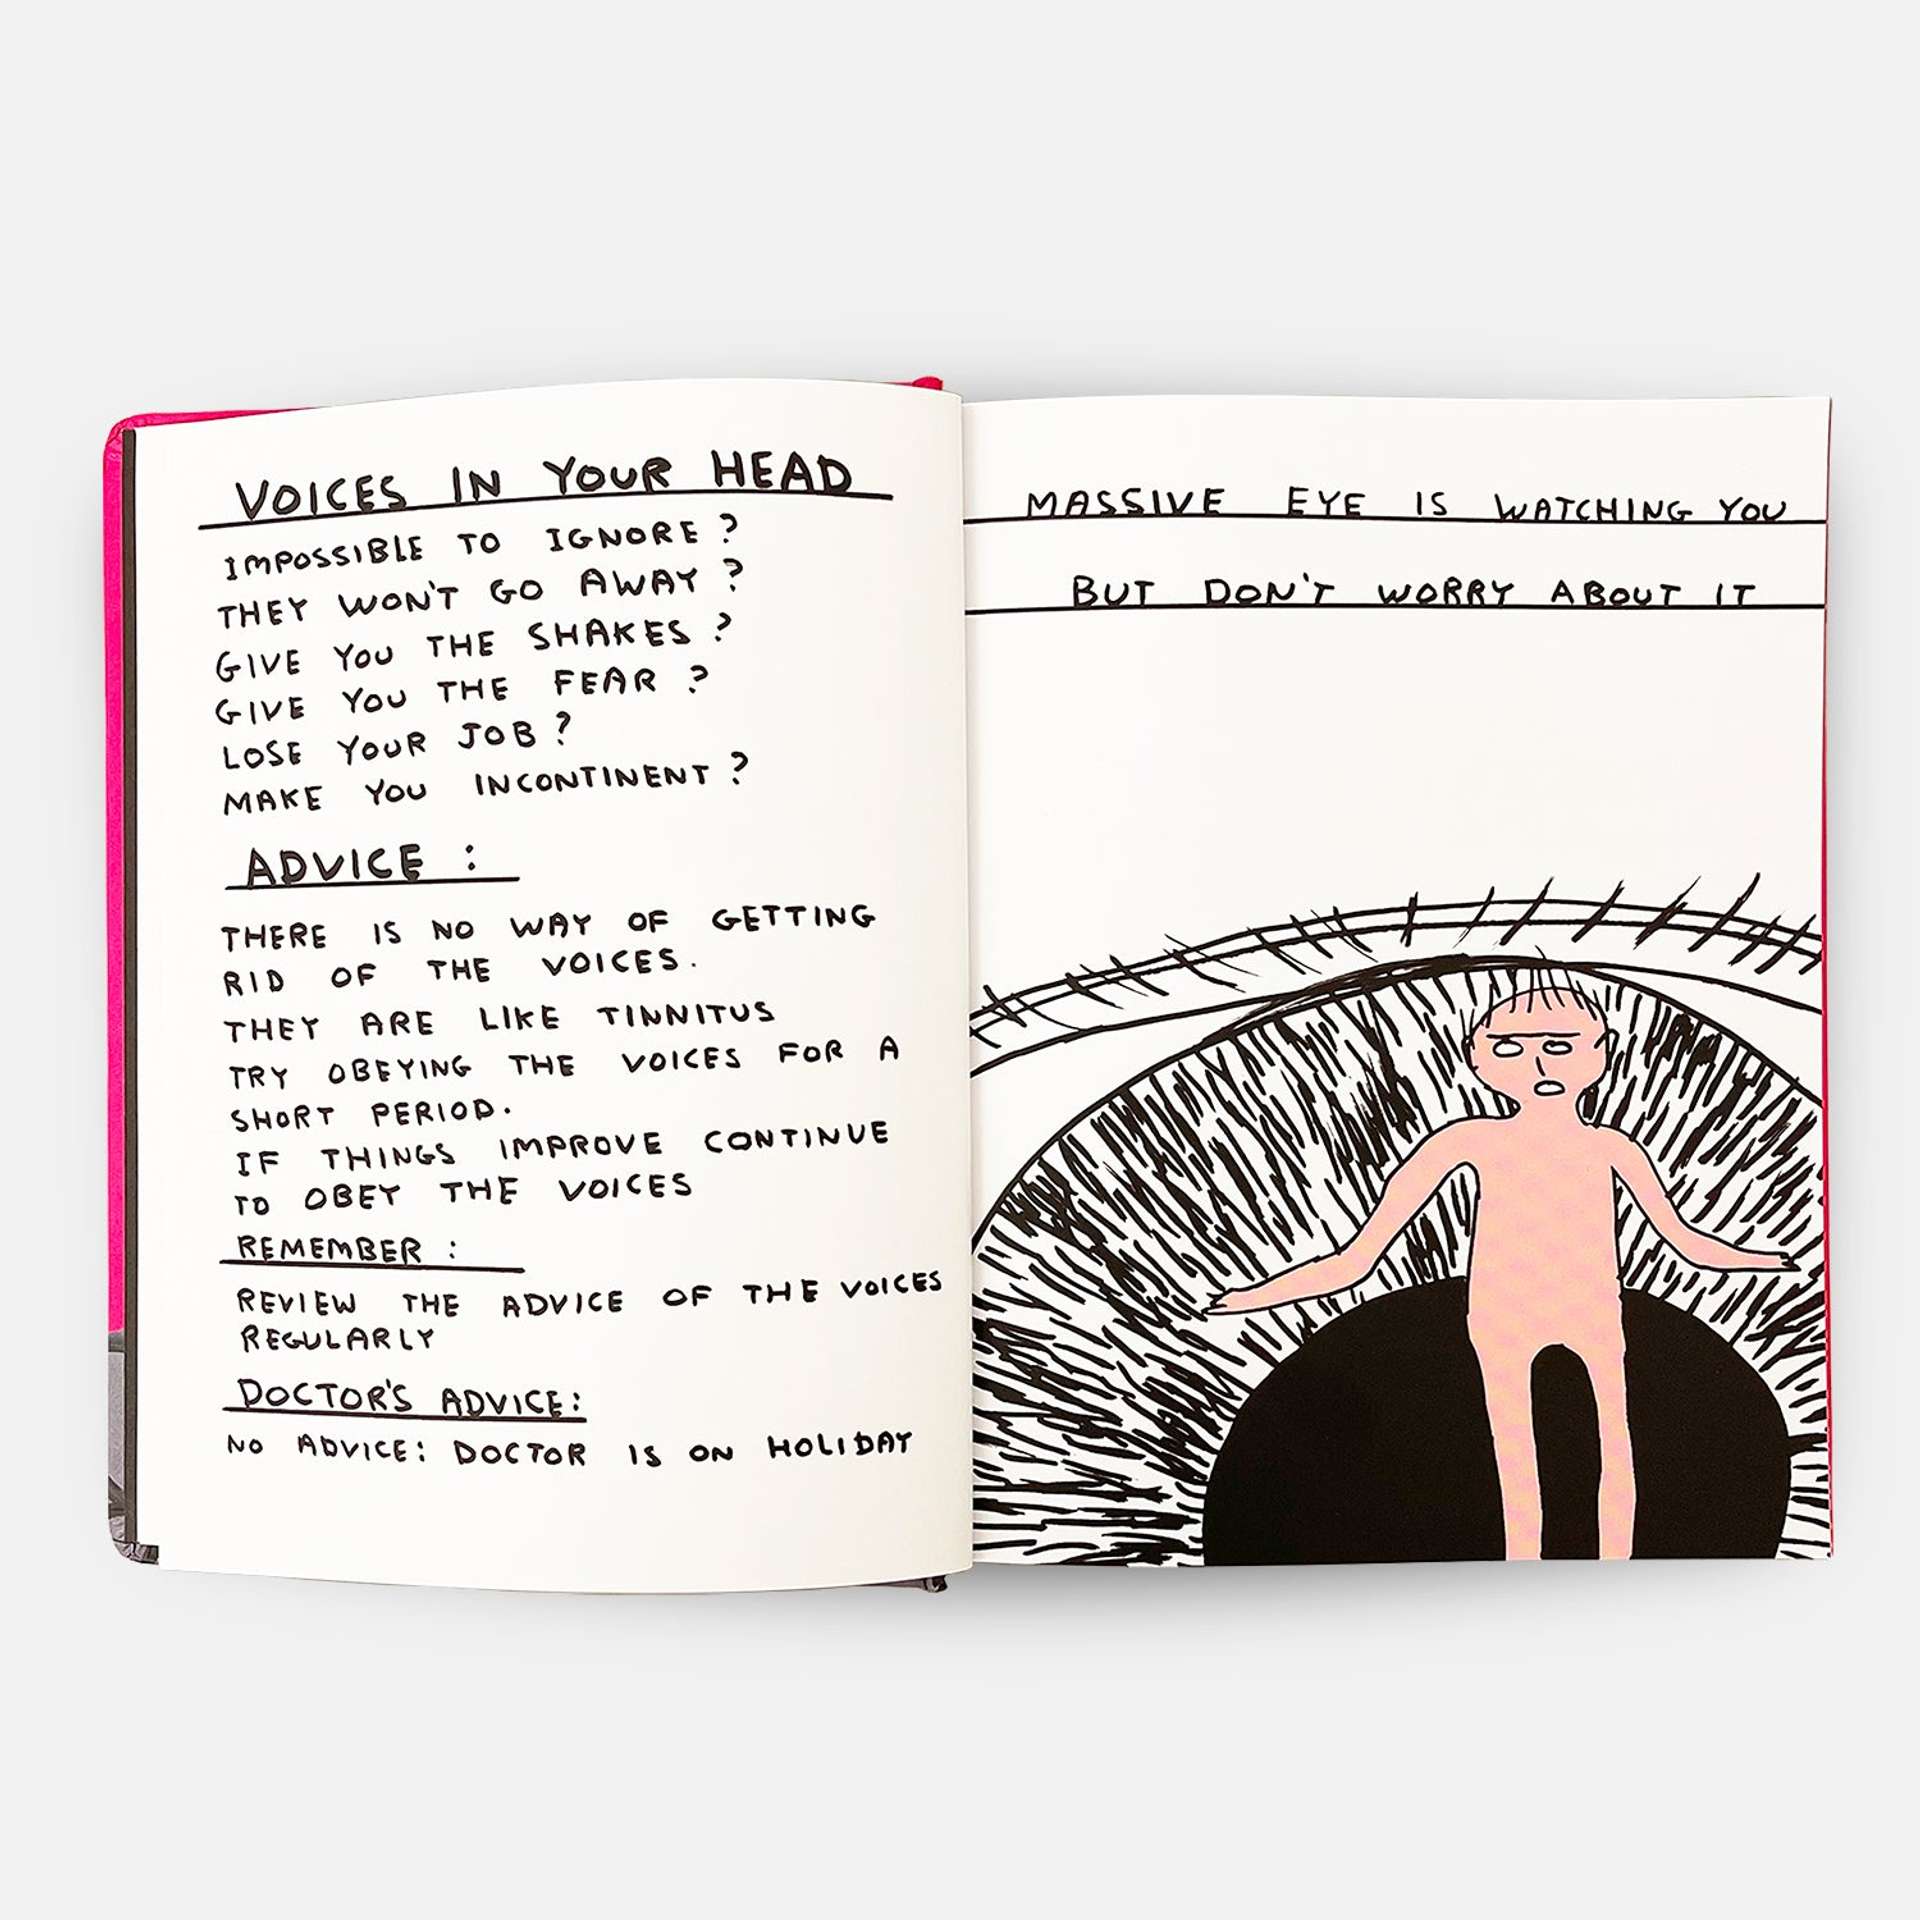  An image of a page from the book How Are You Feeling? by artist David Shrigley. On the left side is some text, addressing the “voices in your head” and providing “advice”. On the right is a human figure – small against a massive eye, and under a text reading “Massive eye is watching you but don’t worry about it.”